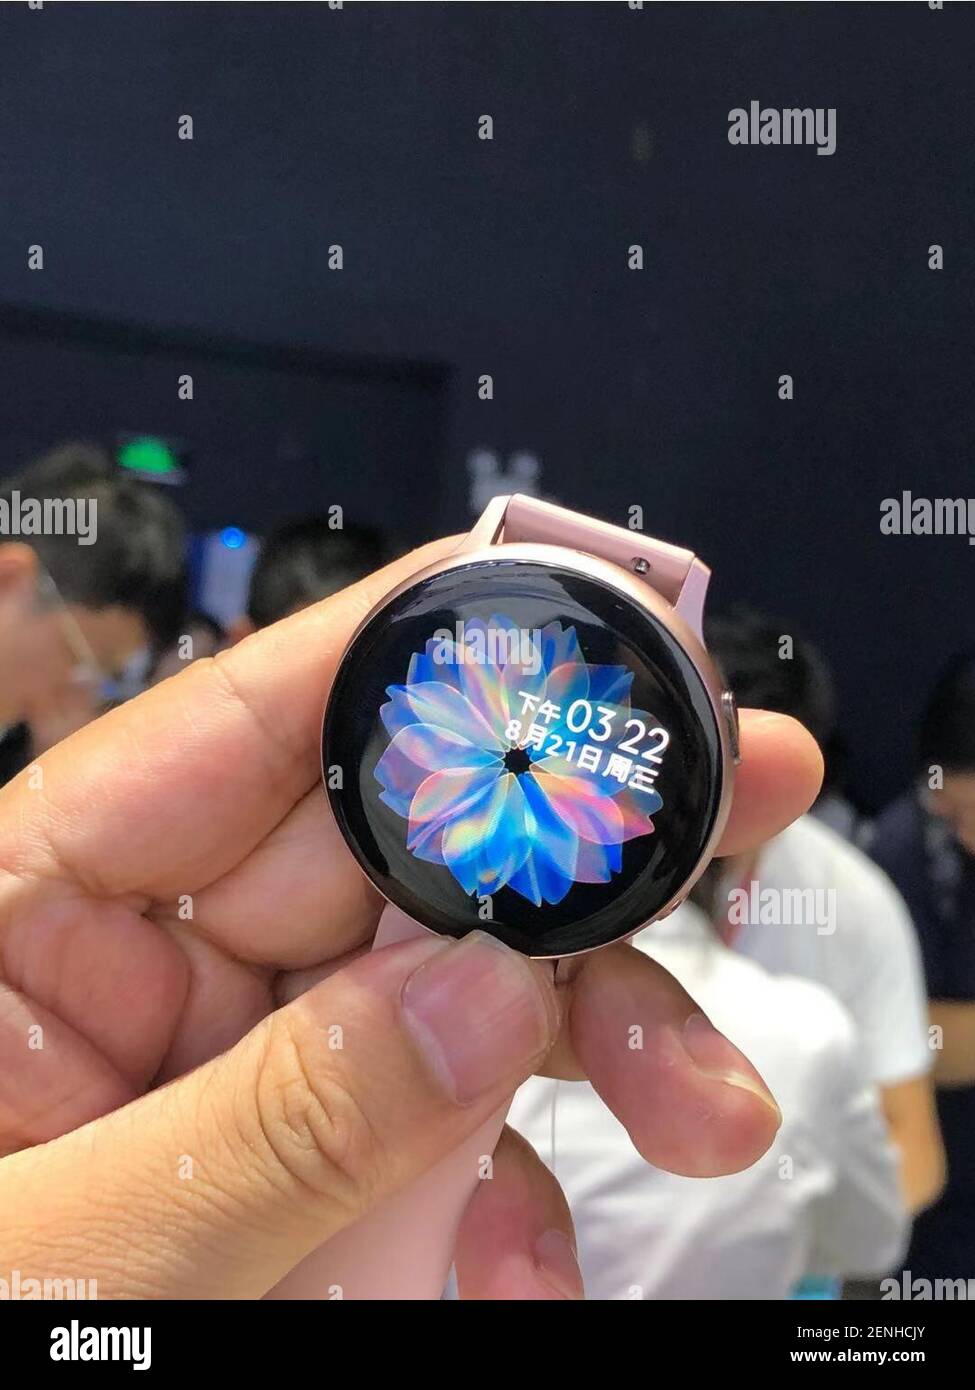 A visitor tries out a Samsung Galaxy Watch Active 2 smartwatch during a new product event in Beijing, China, 21 August 2019. Preorders for Samsung's newest smartwatch started for $279. Samsung